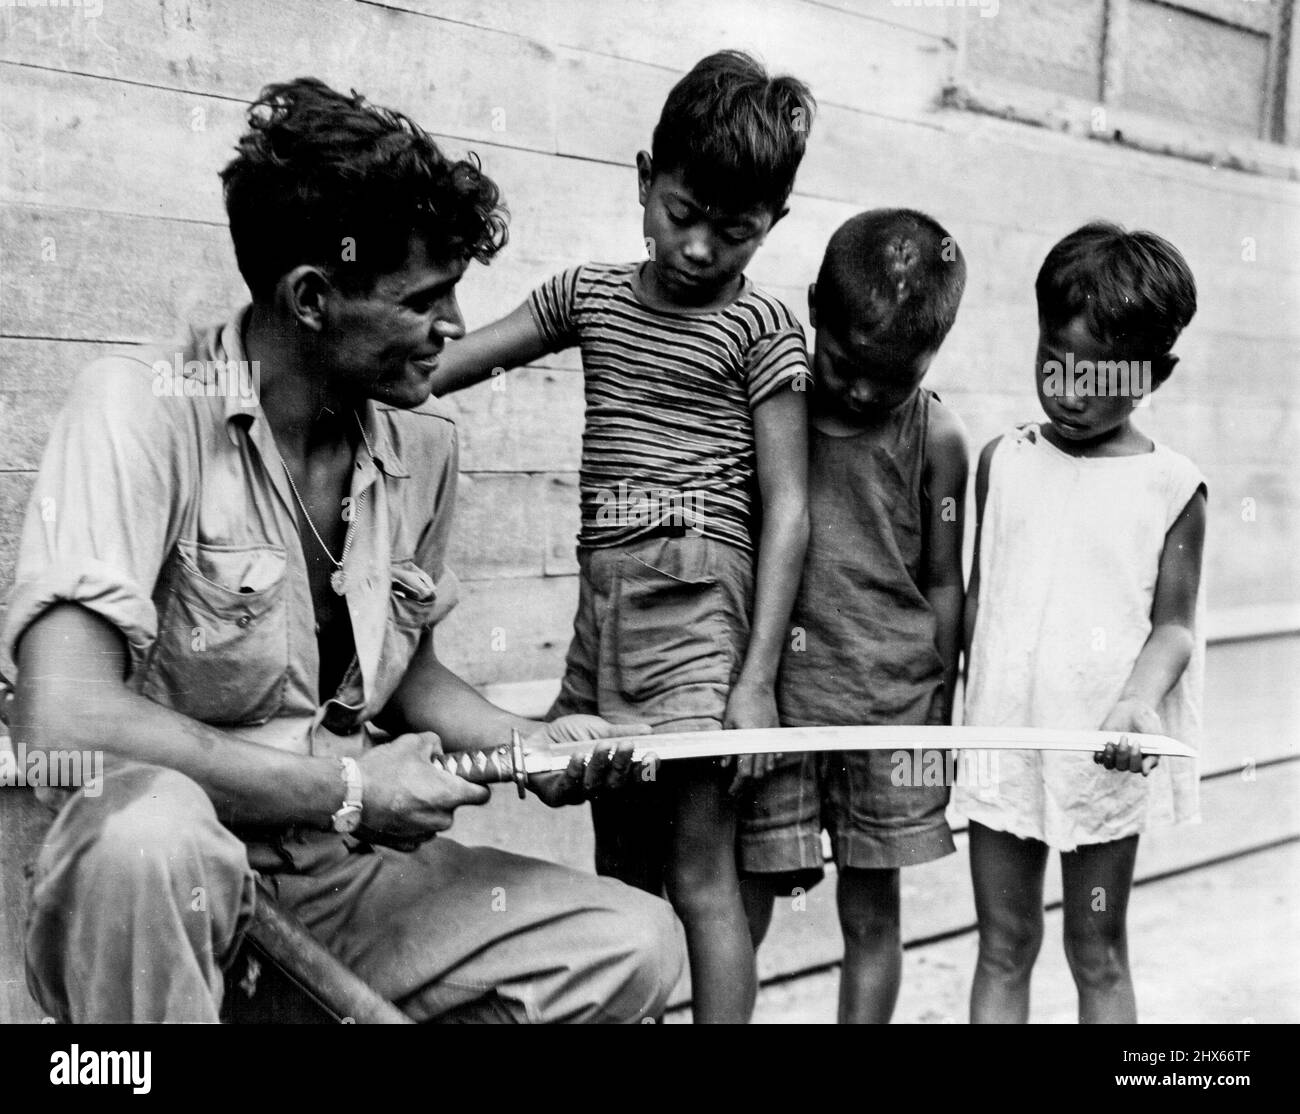 Hero Worship -- Filipino children solemnly inspect a Samurai sword that Private First Class Cornelius A. Lubo, Syracuse, New York, took from a Jap officer after slaying him and his sixteen-man patrol at Palo Bridge, Palo, Leyte Island. December 11, 1944. (Photo by USA Signal Corps Photo). Stock Photo